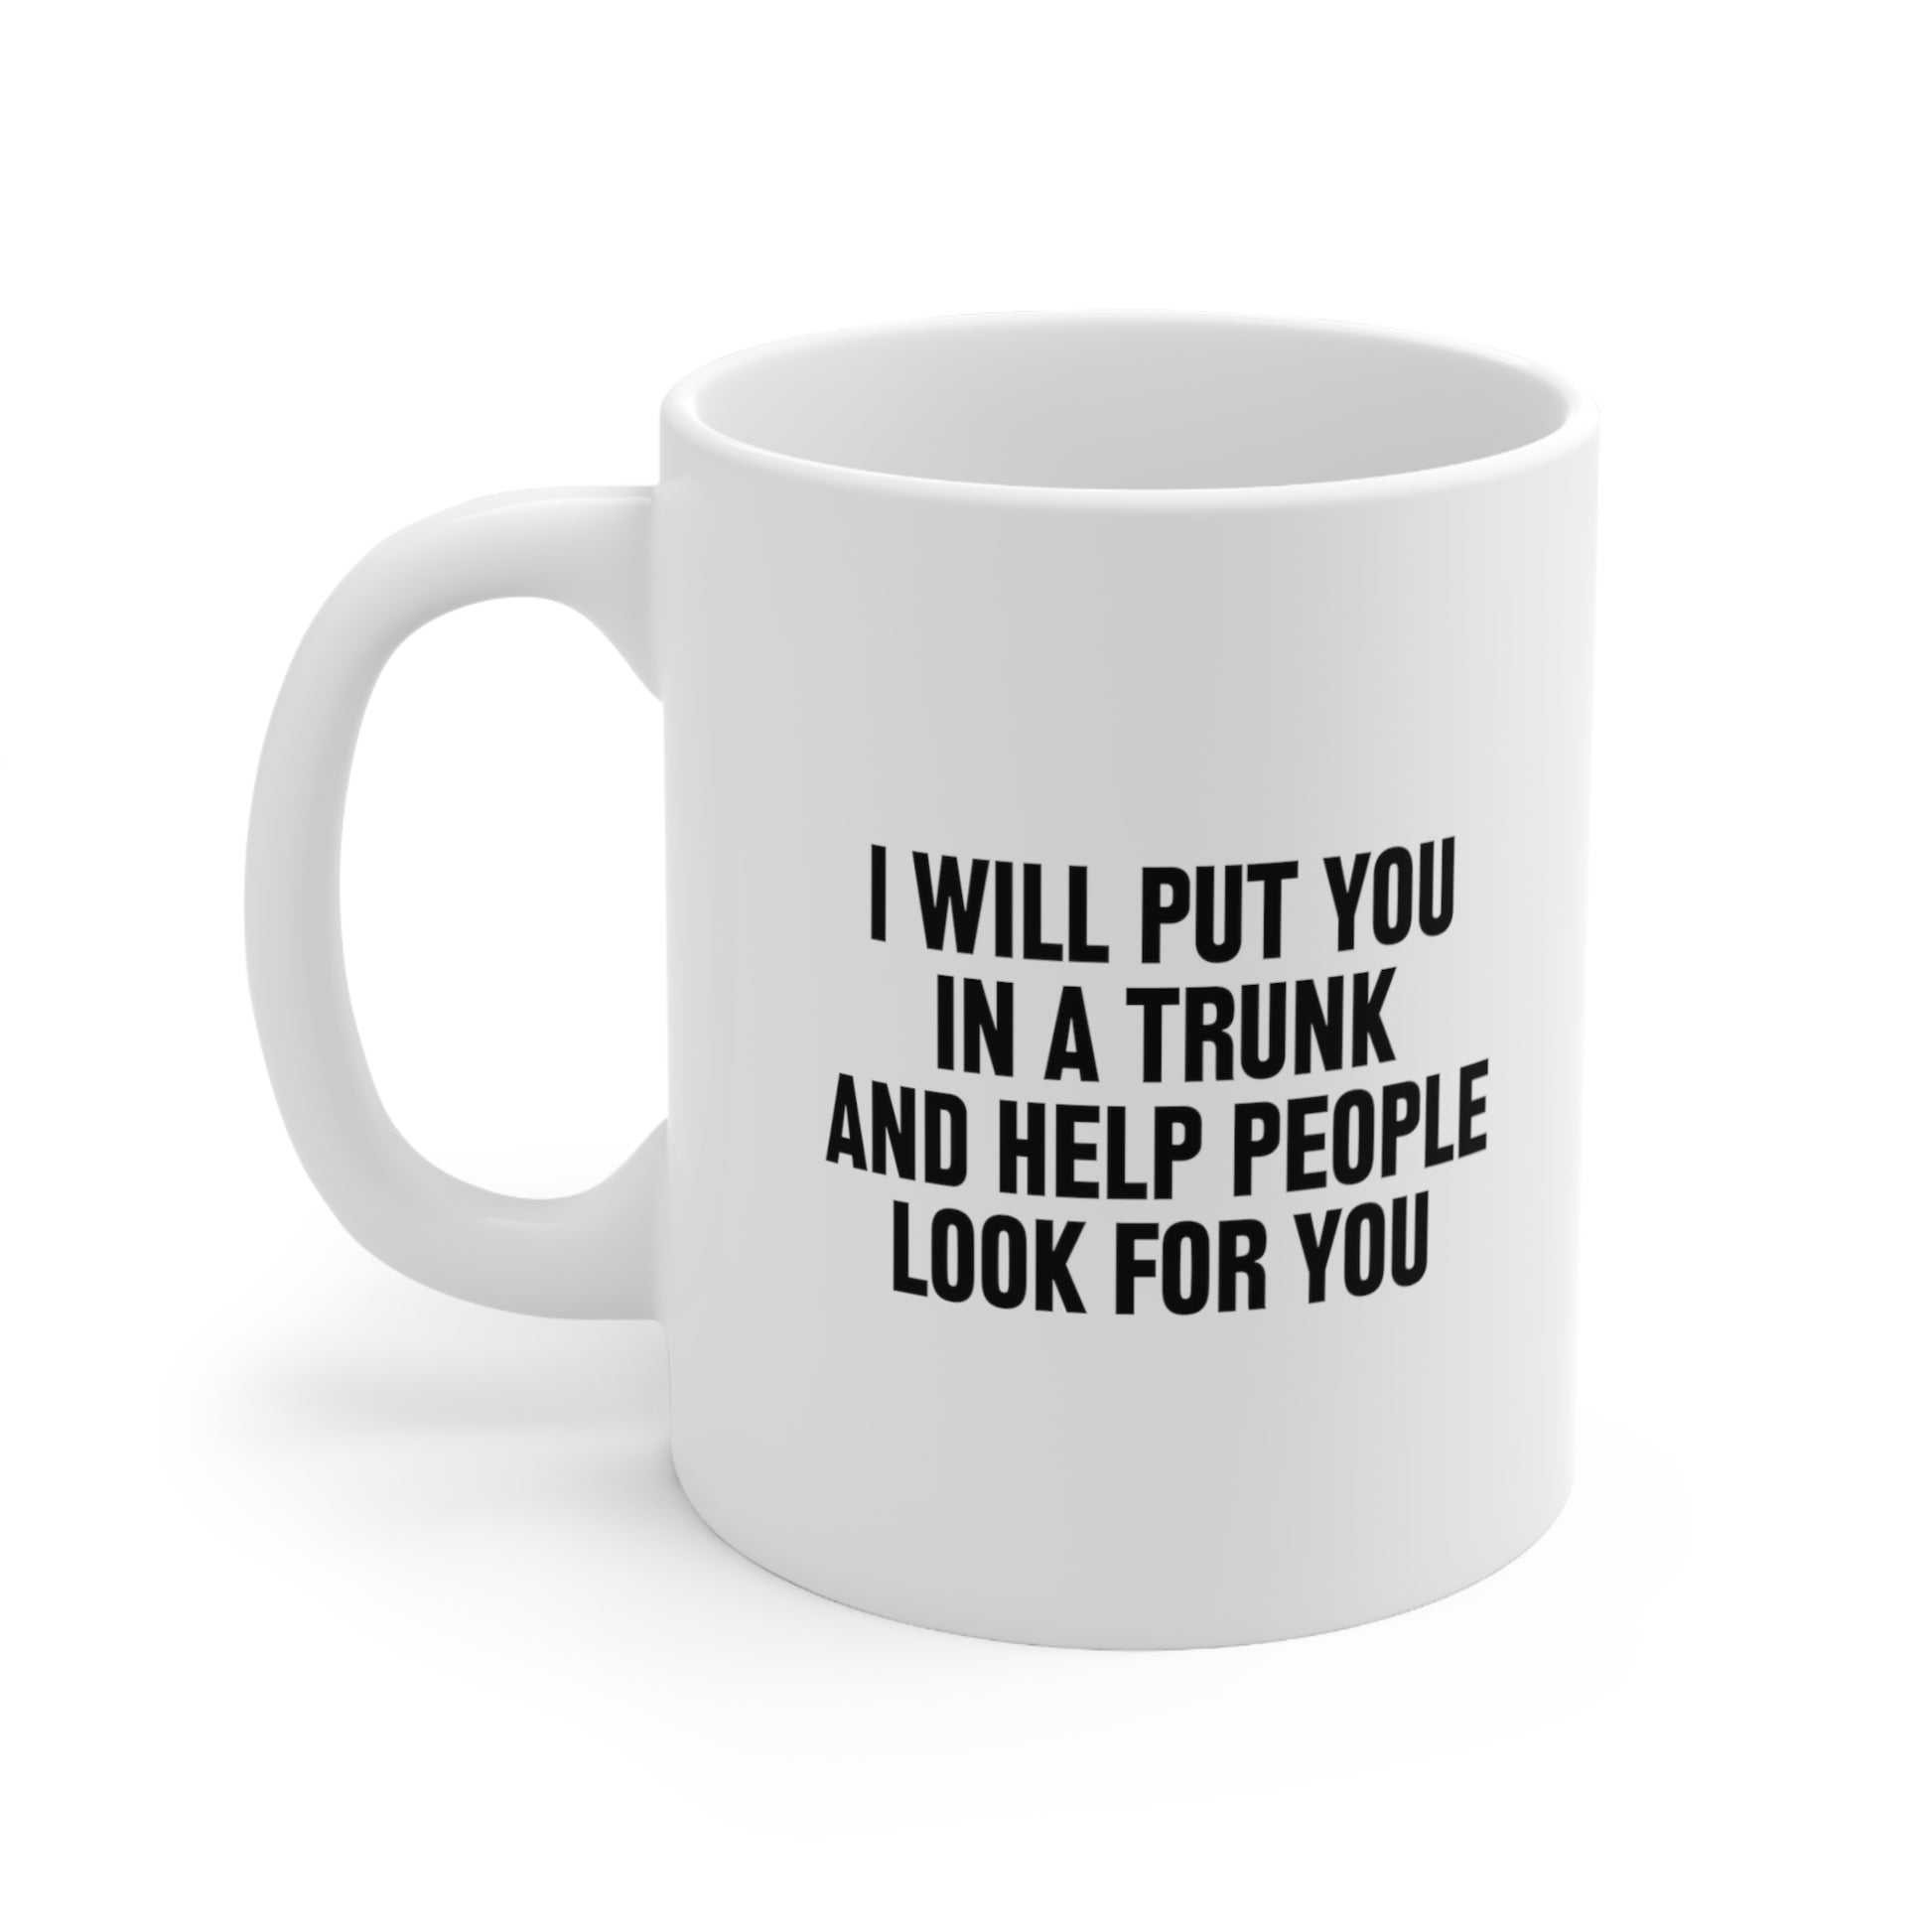 I Will Put You in a Trunk and Help People Look for You Coffee Mug